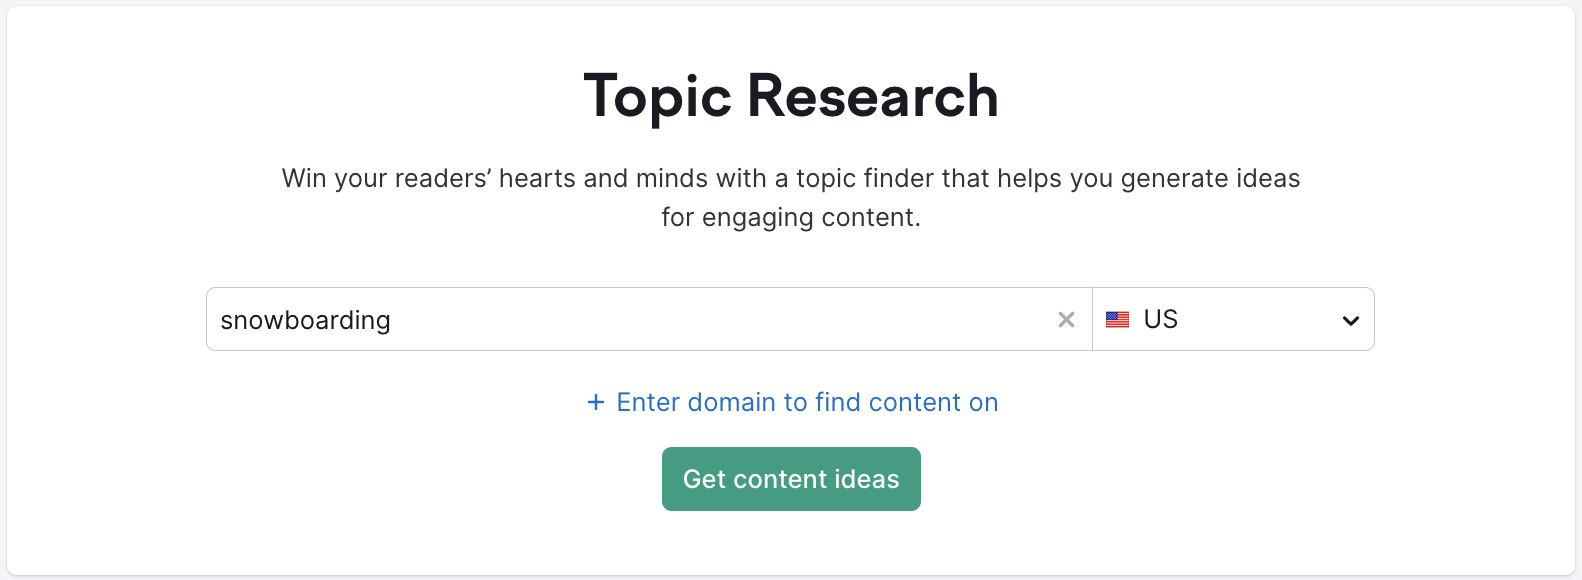 Generating Content Ideas with Topic Research image 1